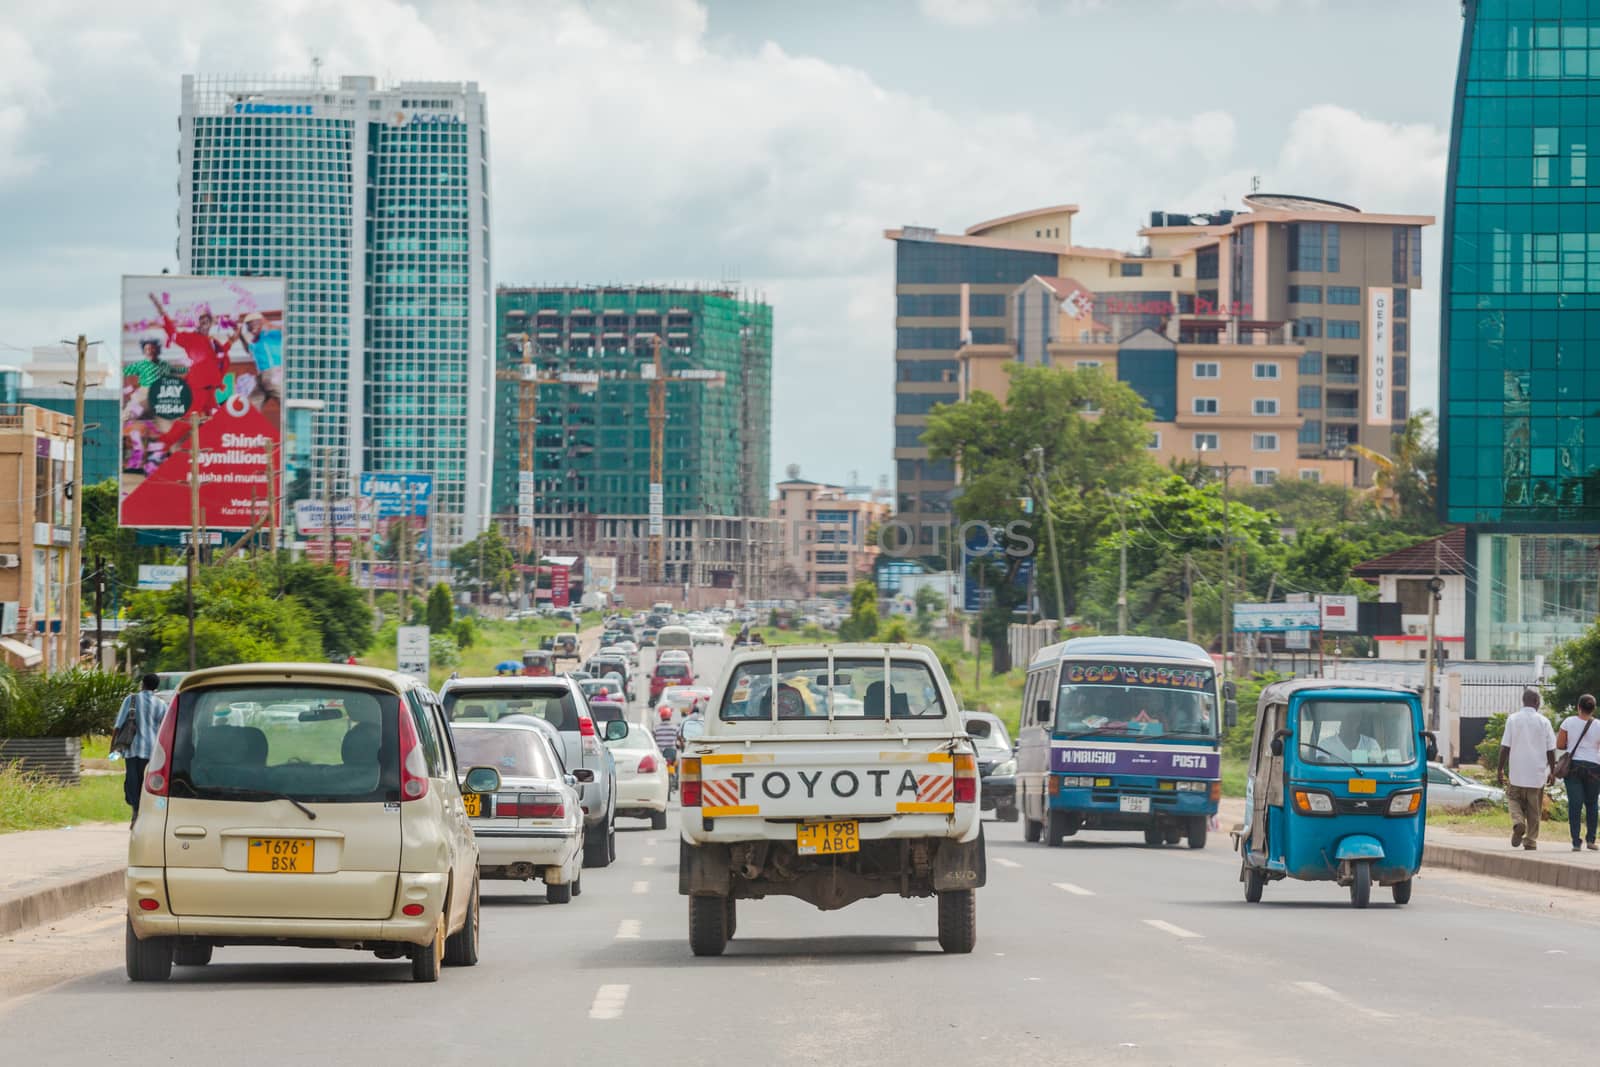 Dar Es Salaam: April 22: Traffic slows down travellers on the busy streets of Downtown Dar Es Salaam on April 22, 2015 in Dar Es Salaam, Tanzania by derejeb